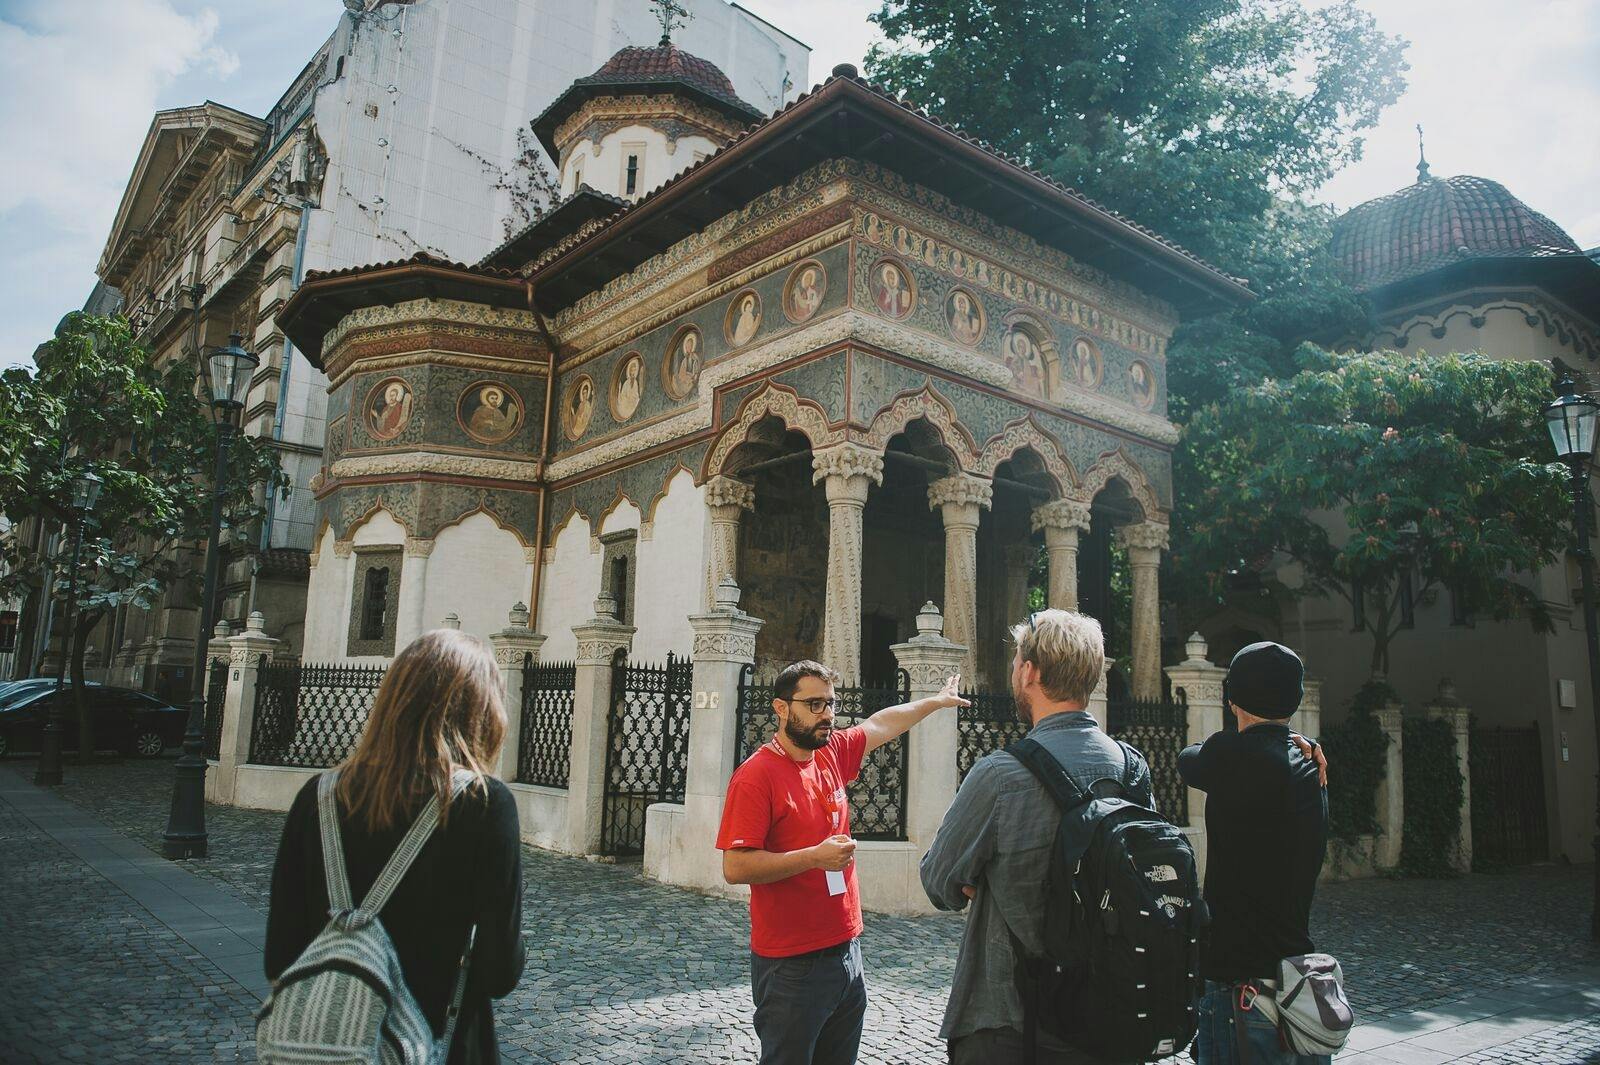 Bucharest bites and sights guided tour